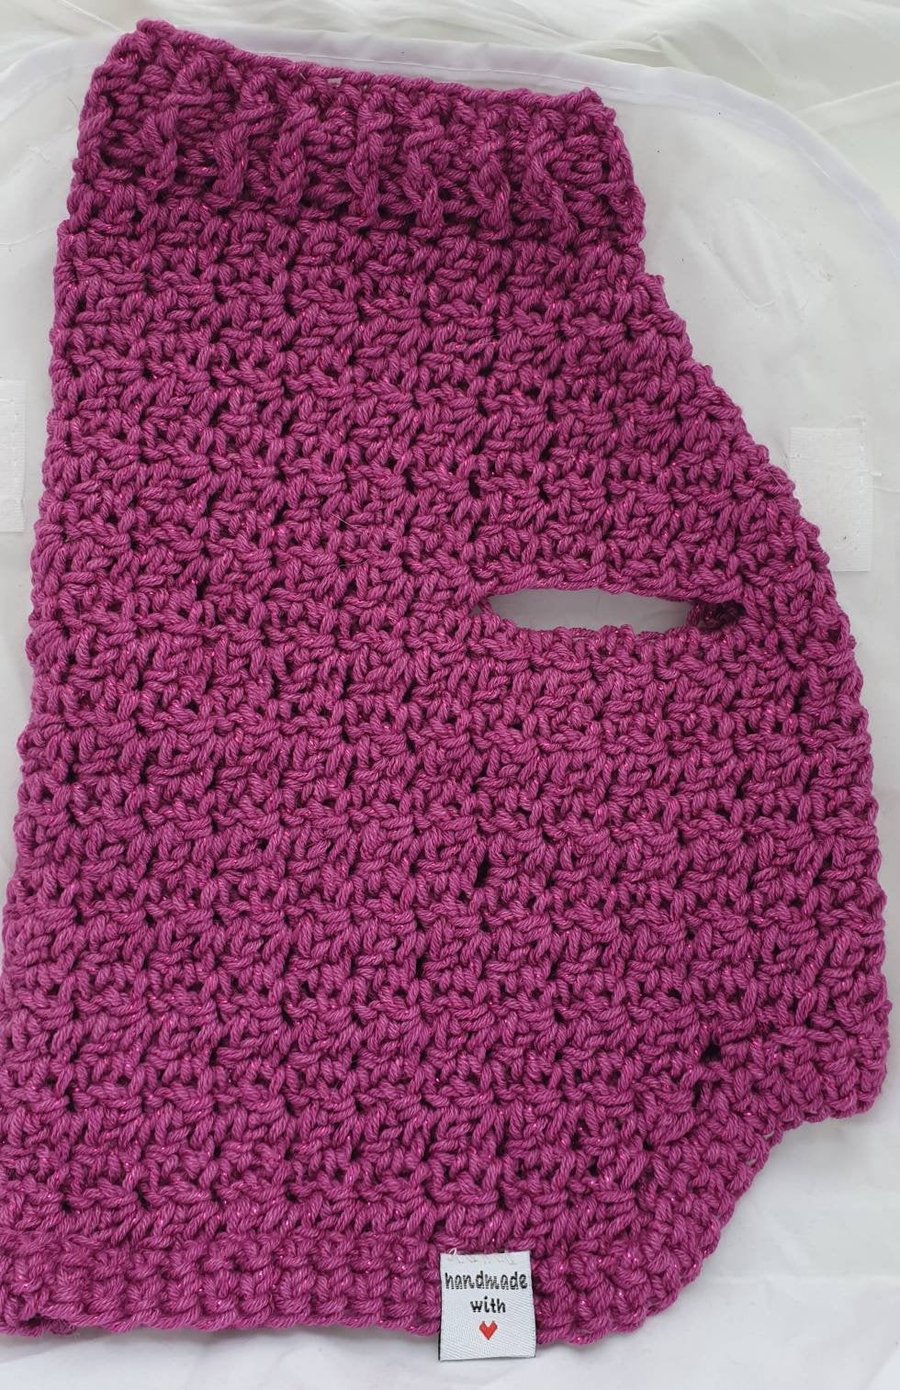 Dark pink sparkly dog sweater, jumper for small dog or puppy